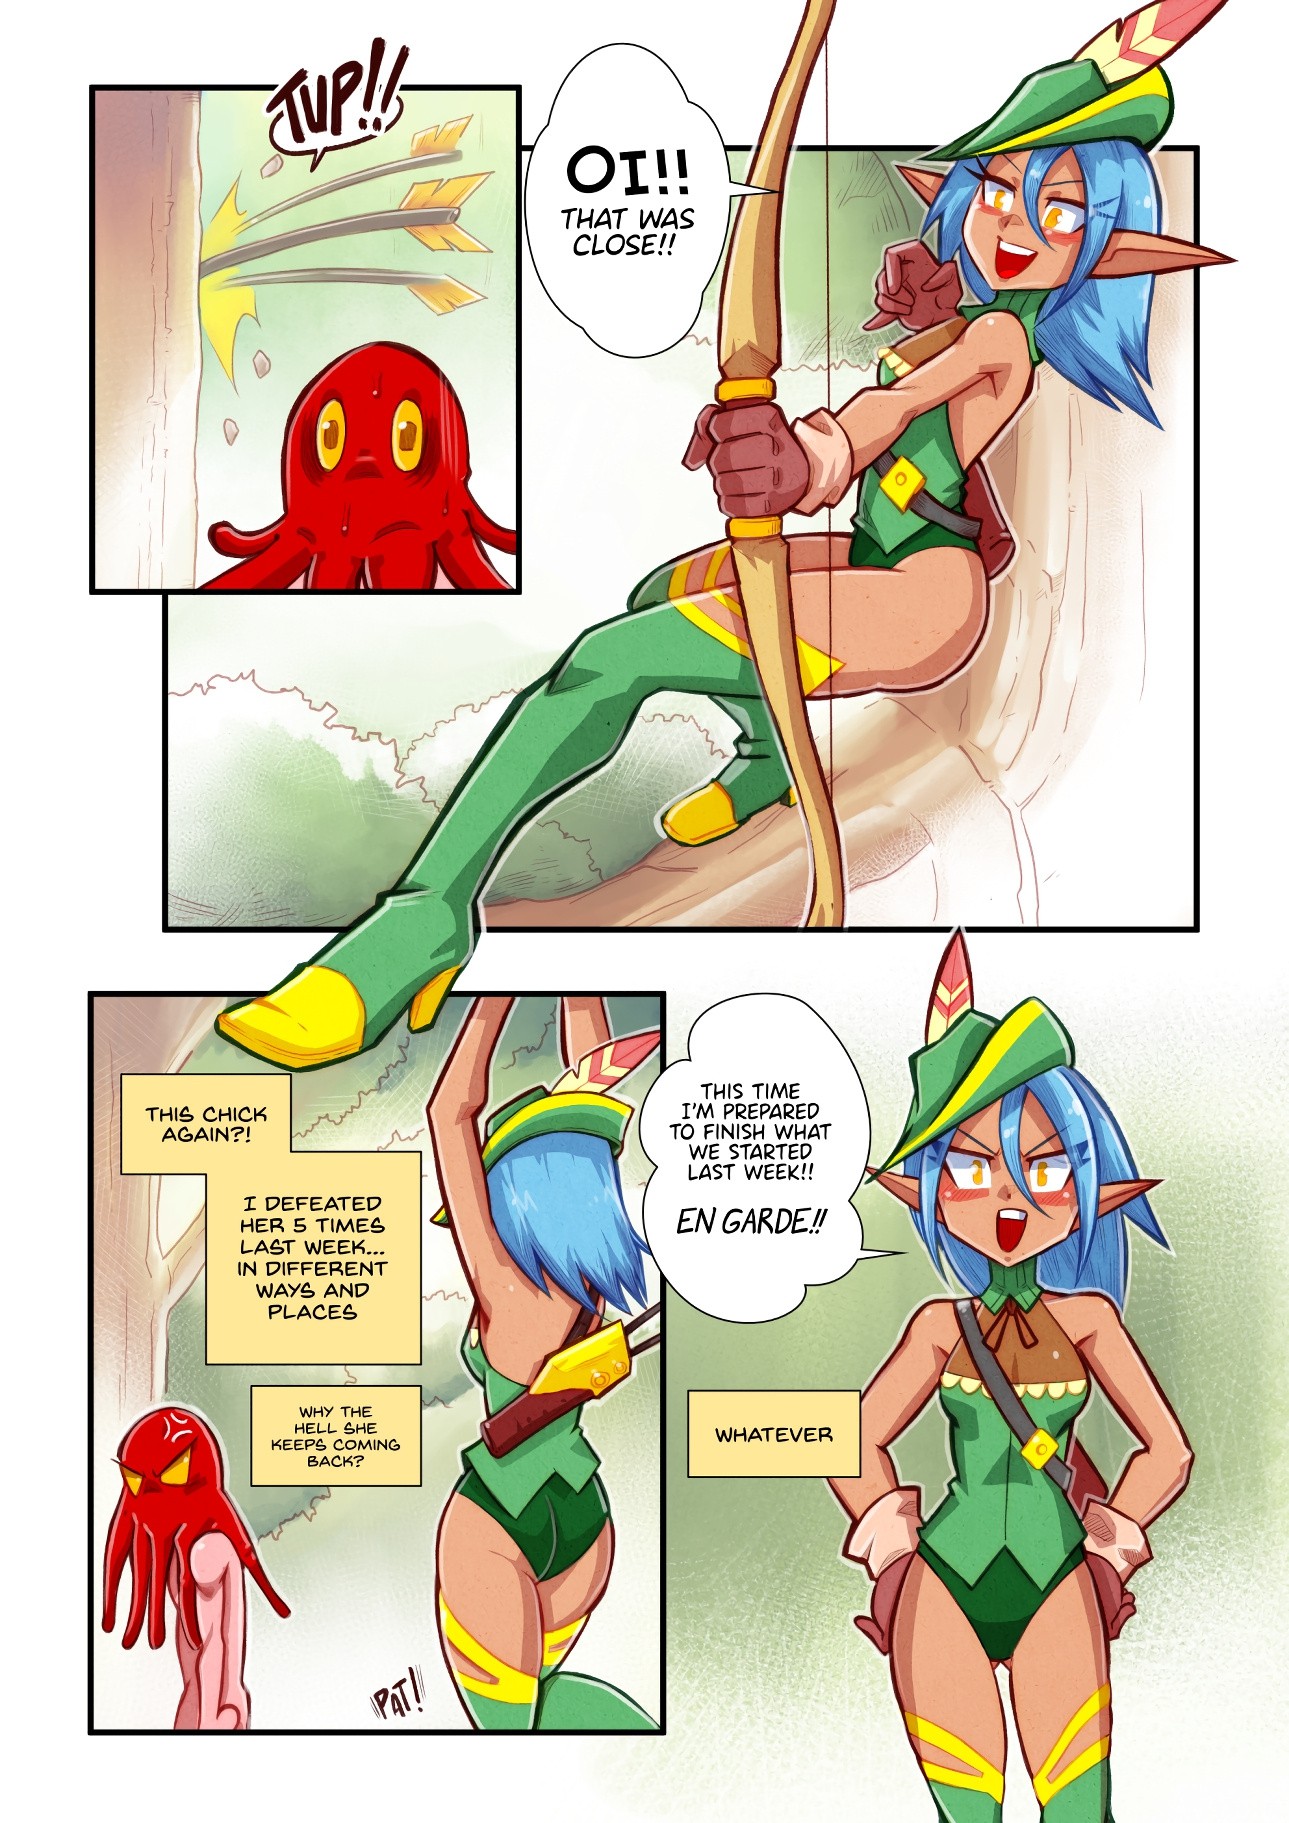 Life as a Tentacle Monster in Another World porn comic picture 7